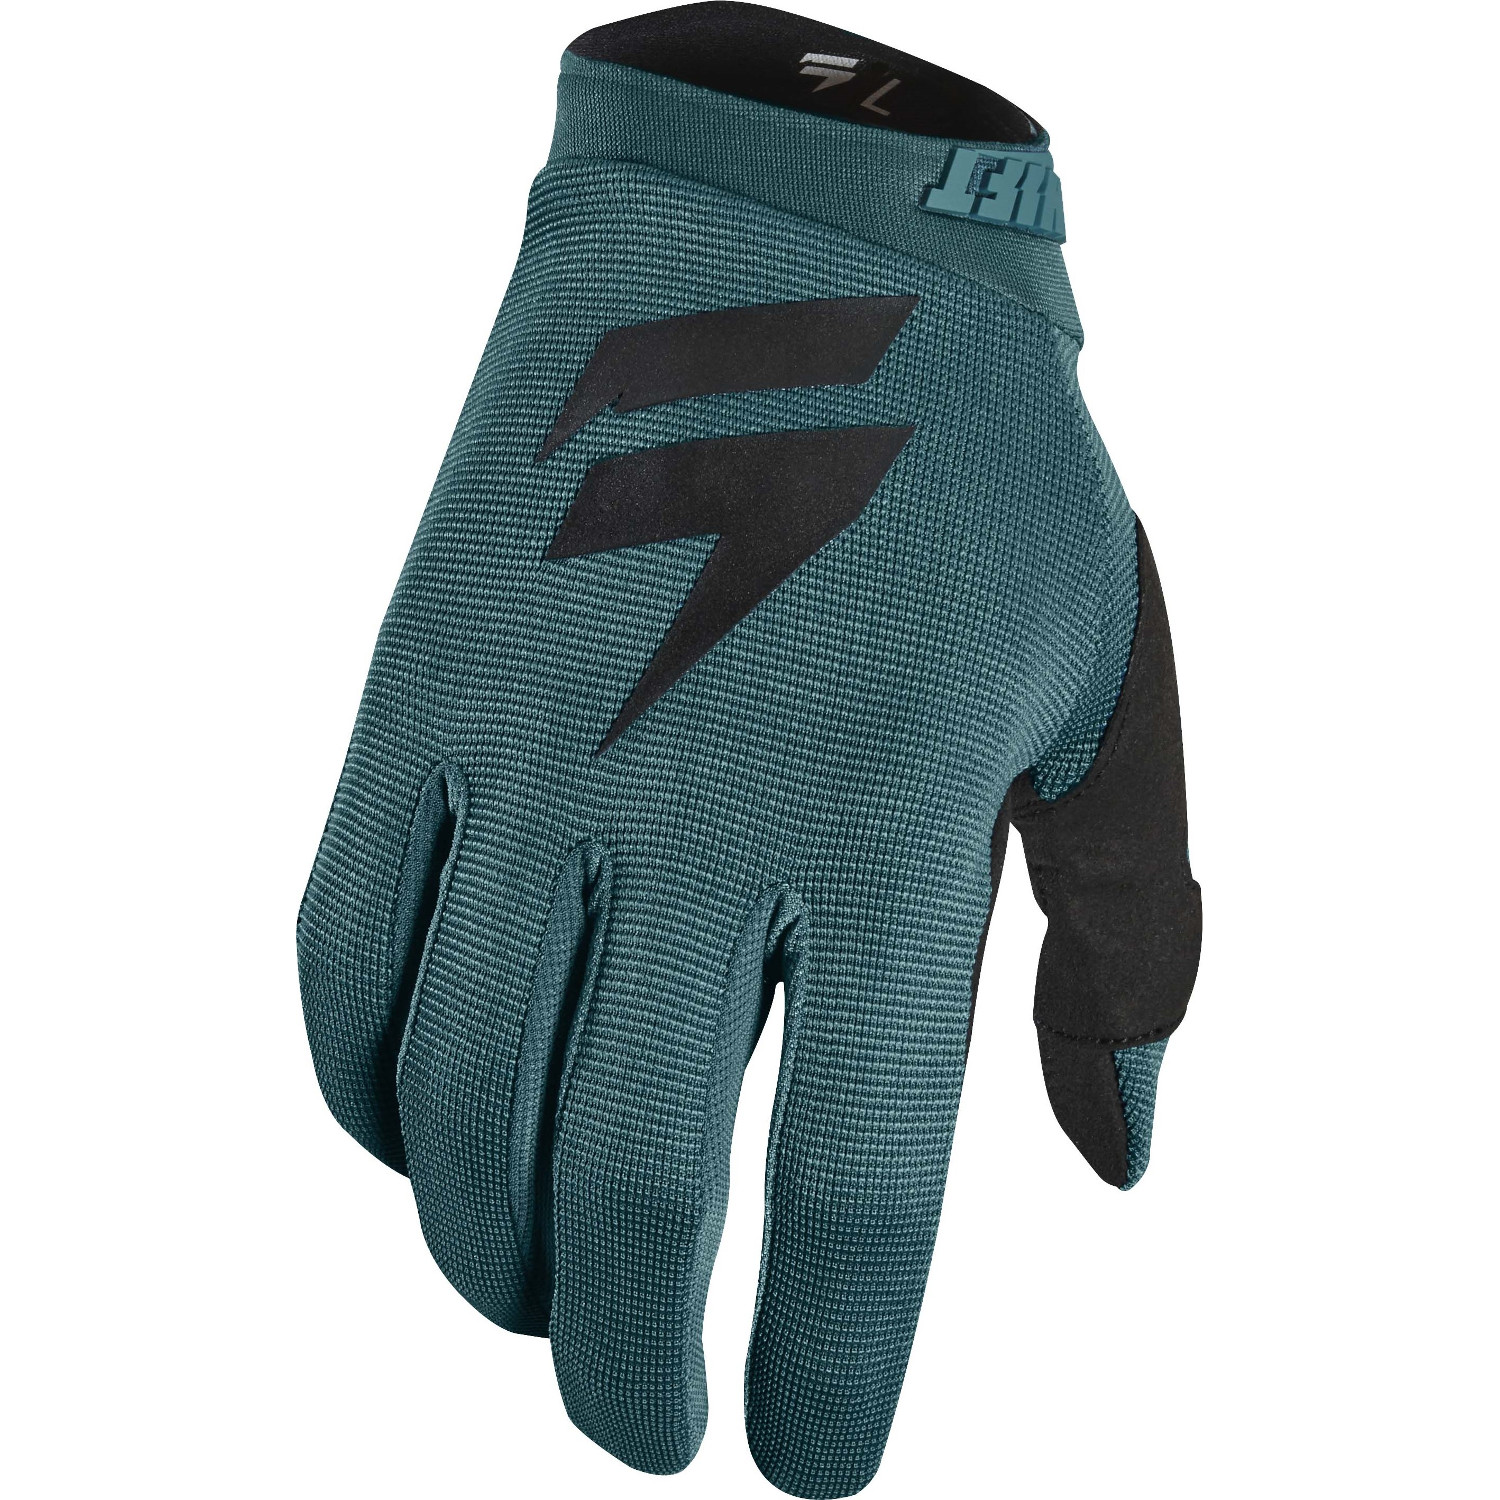 Shift Gloves Whit3 Air Teal